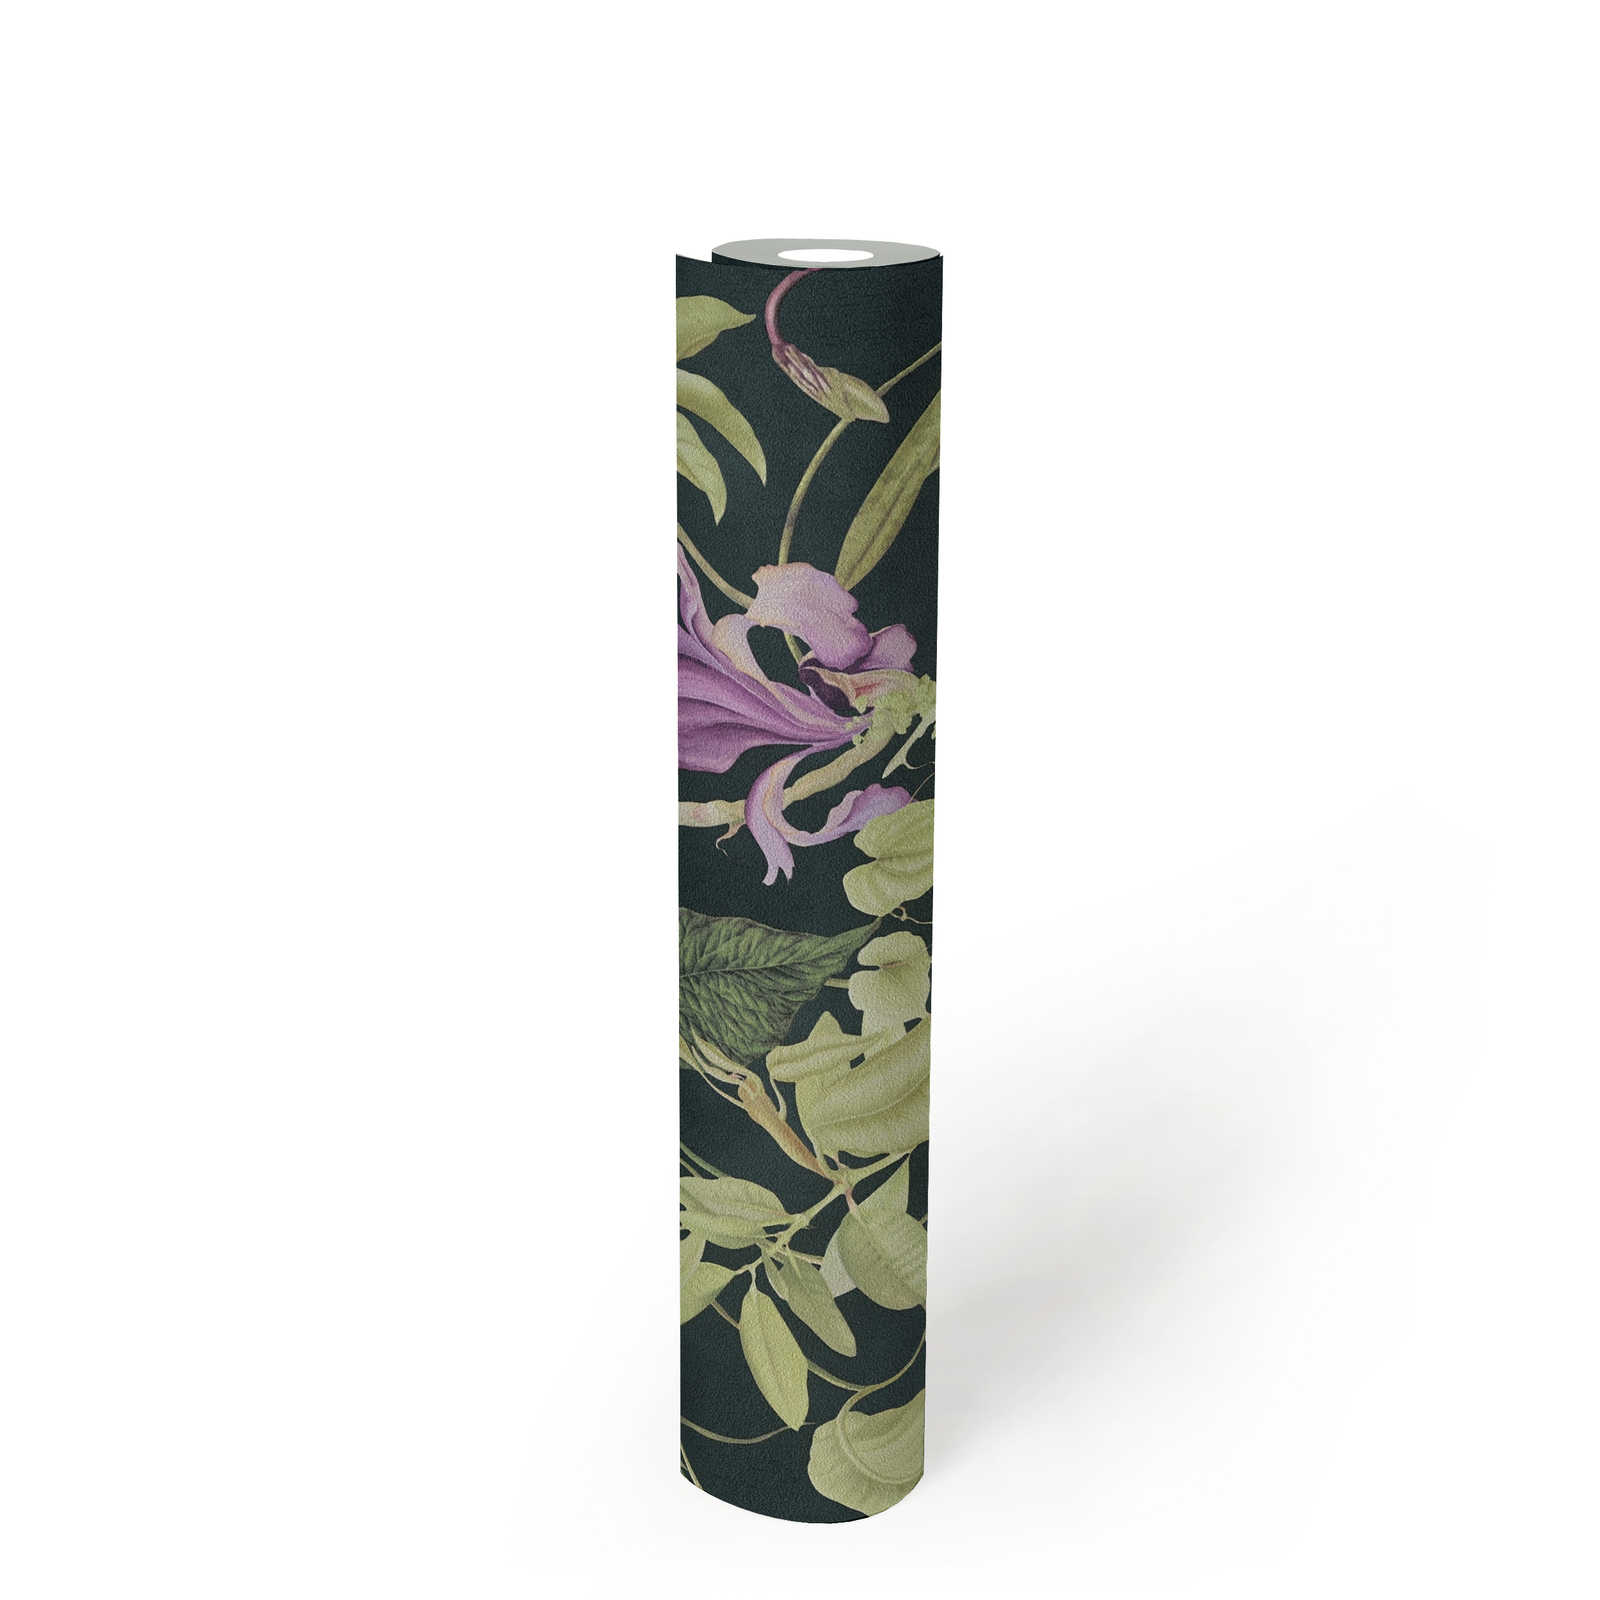             Tropical floral wallpaper Design by MICHALSKY - Green, Black
        